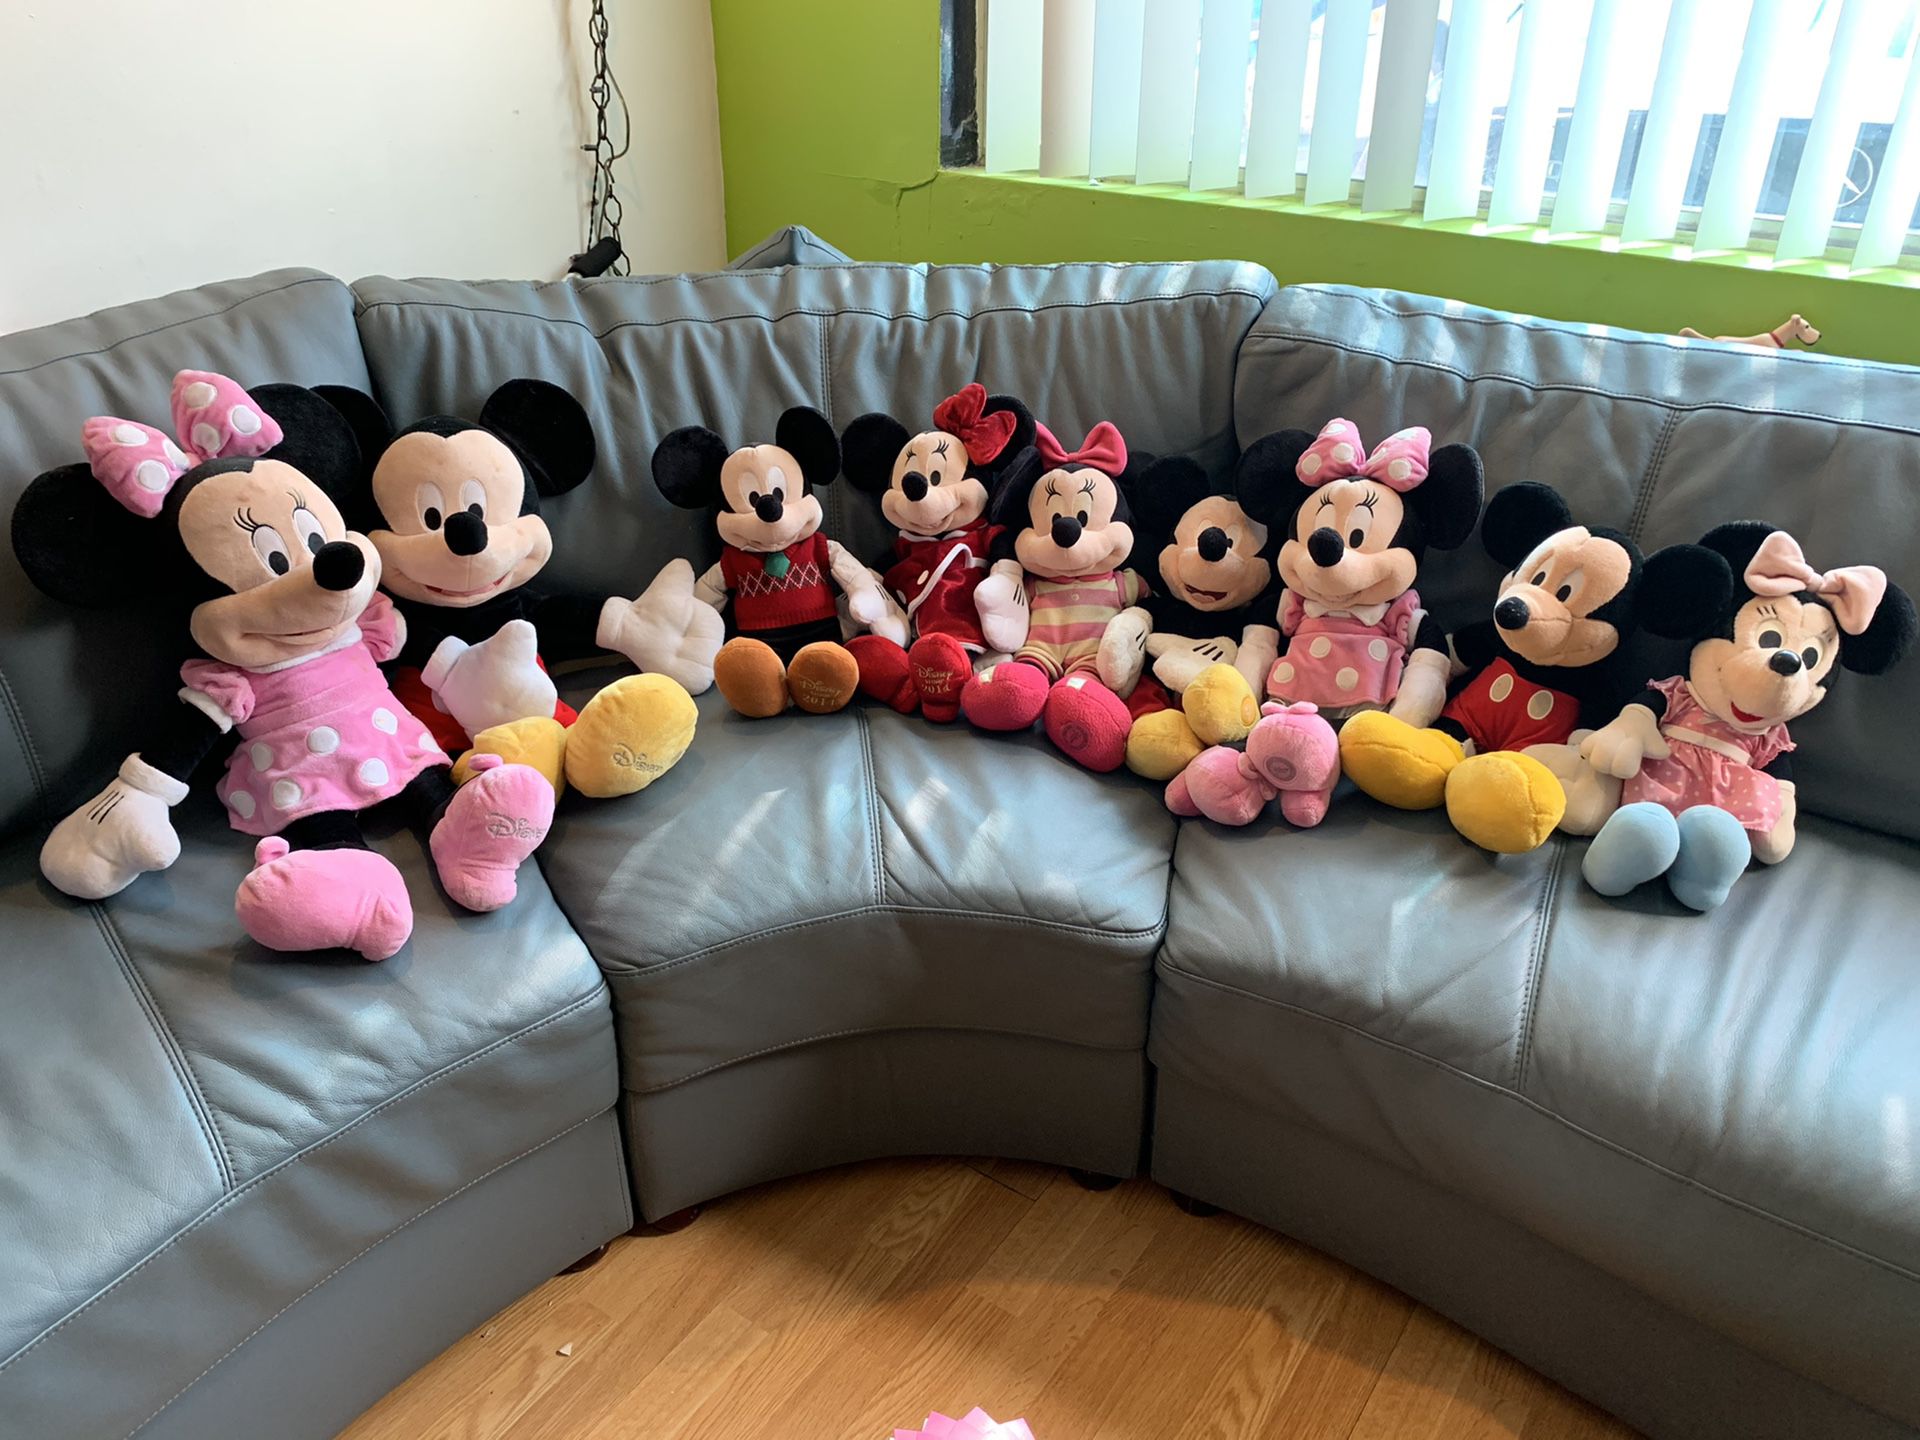 Mickey and Minnie plush collection.